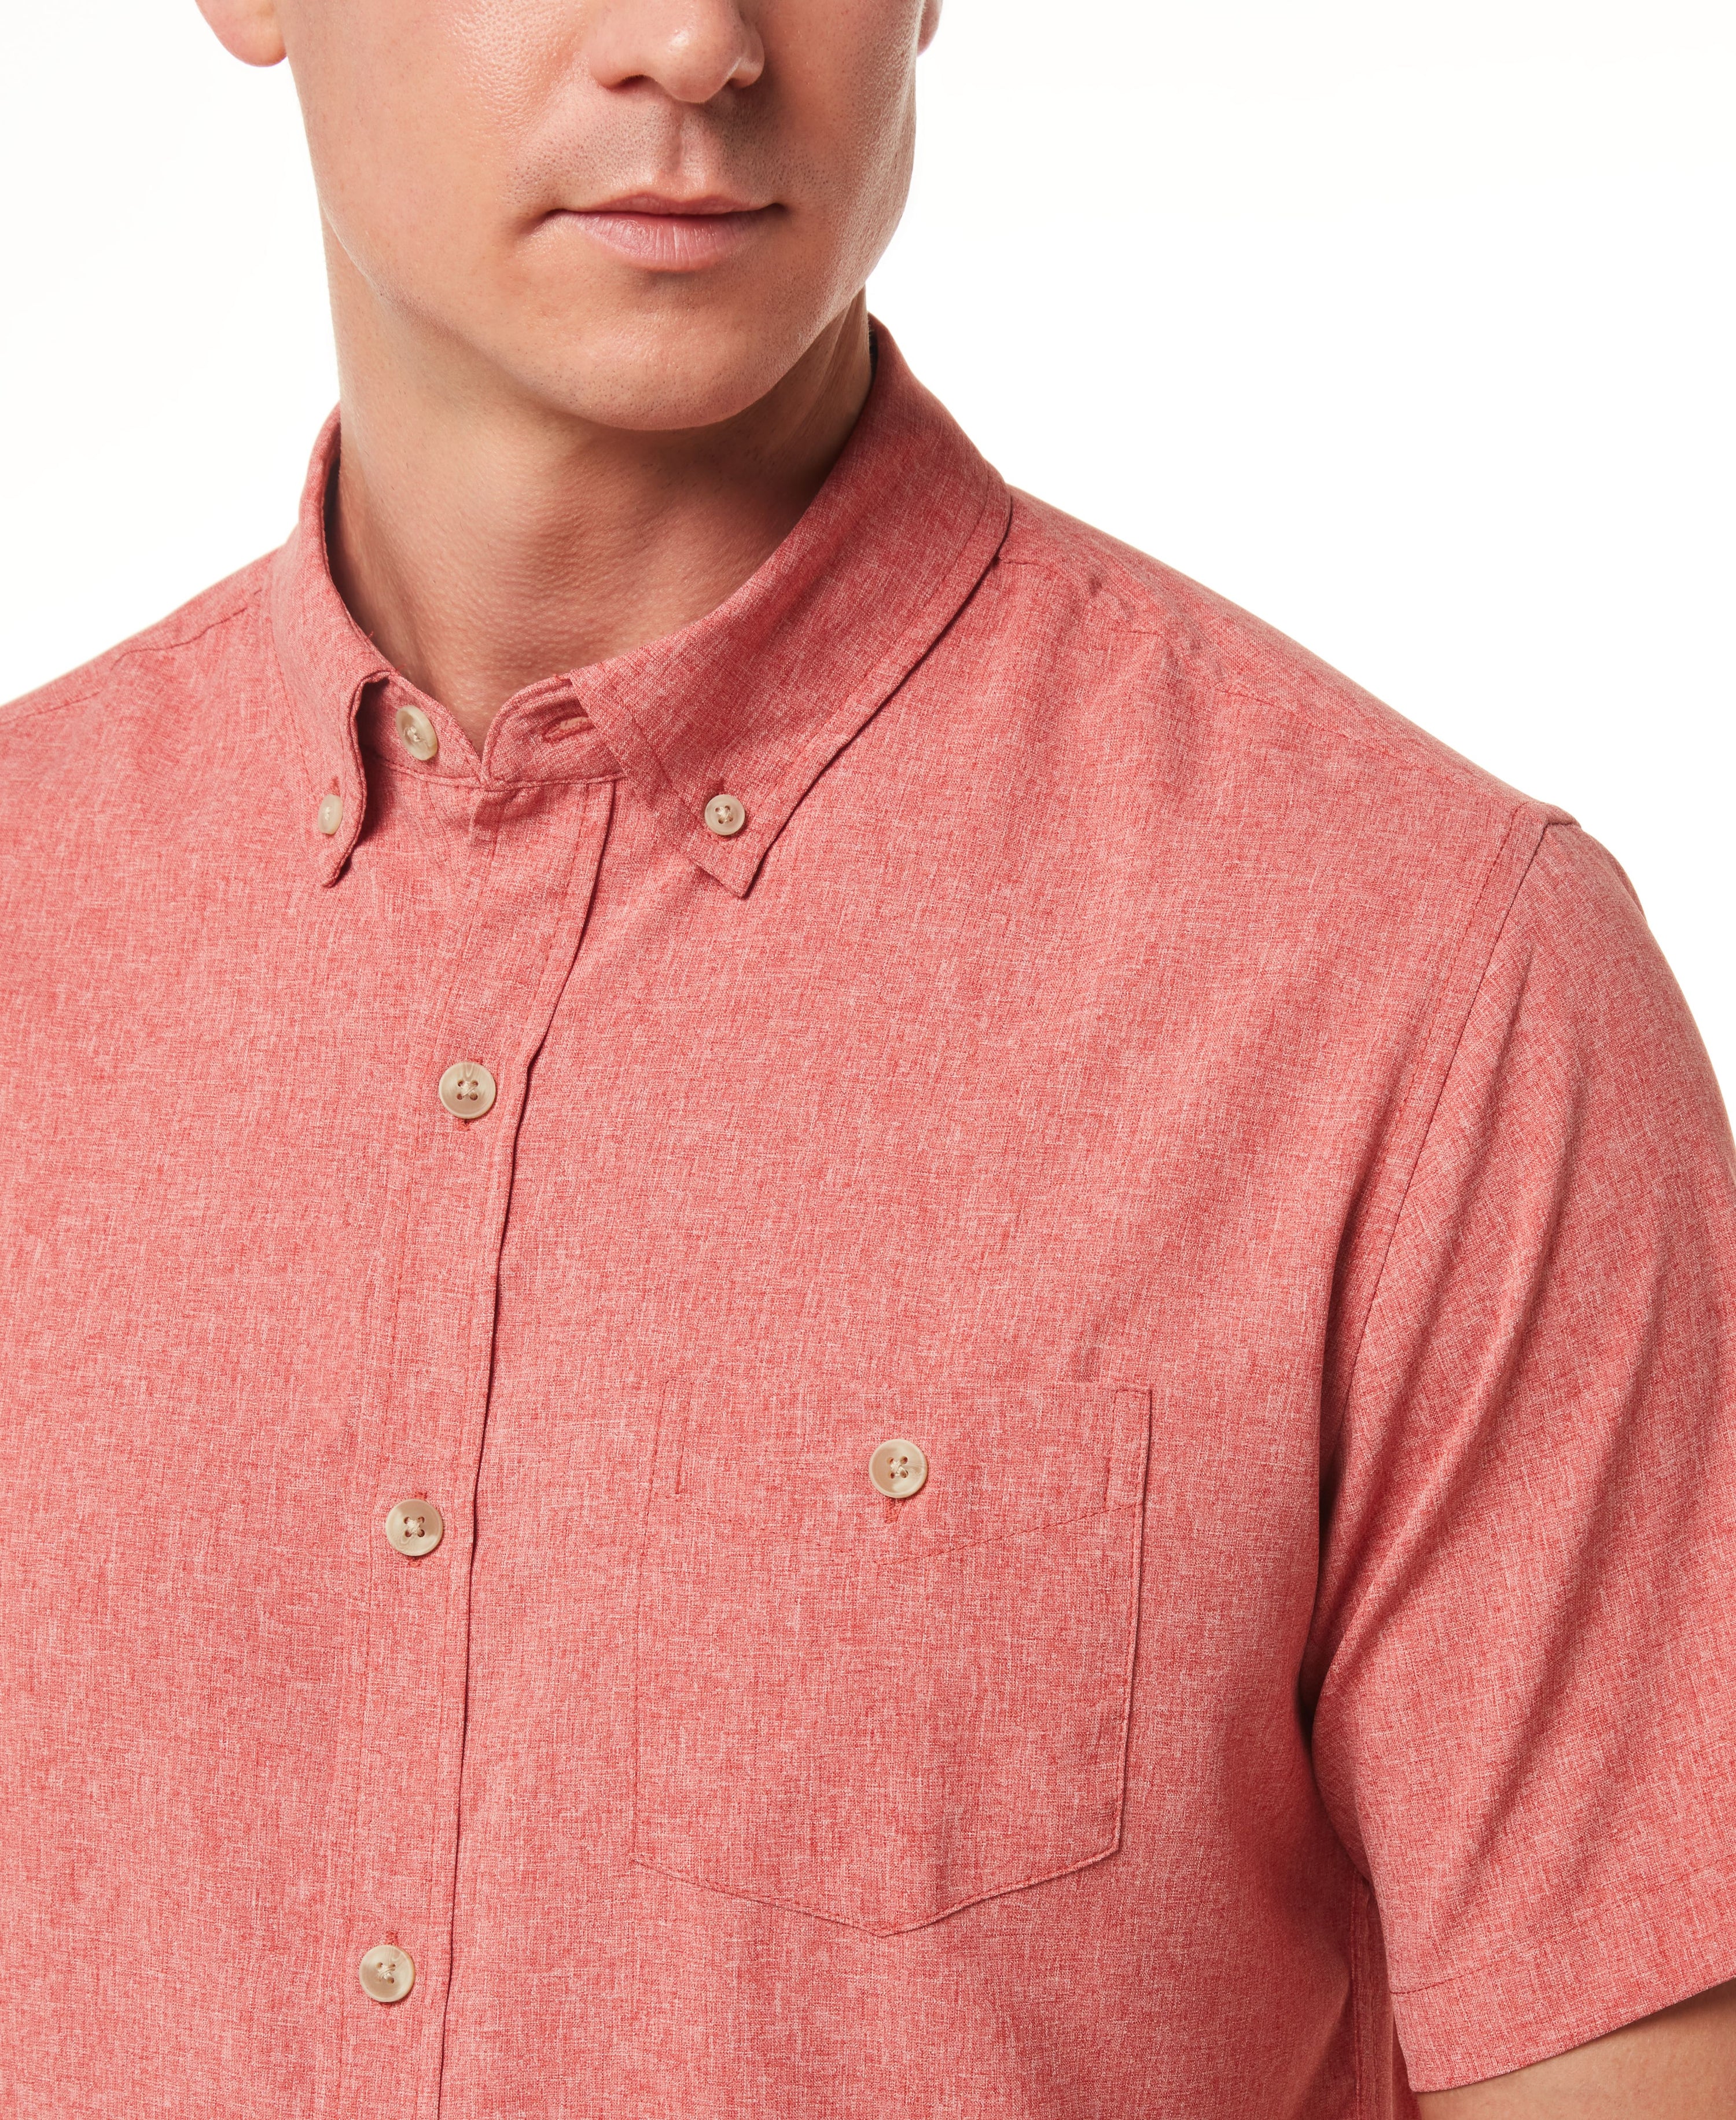 Performance Shirt in Cranberry